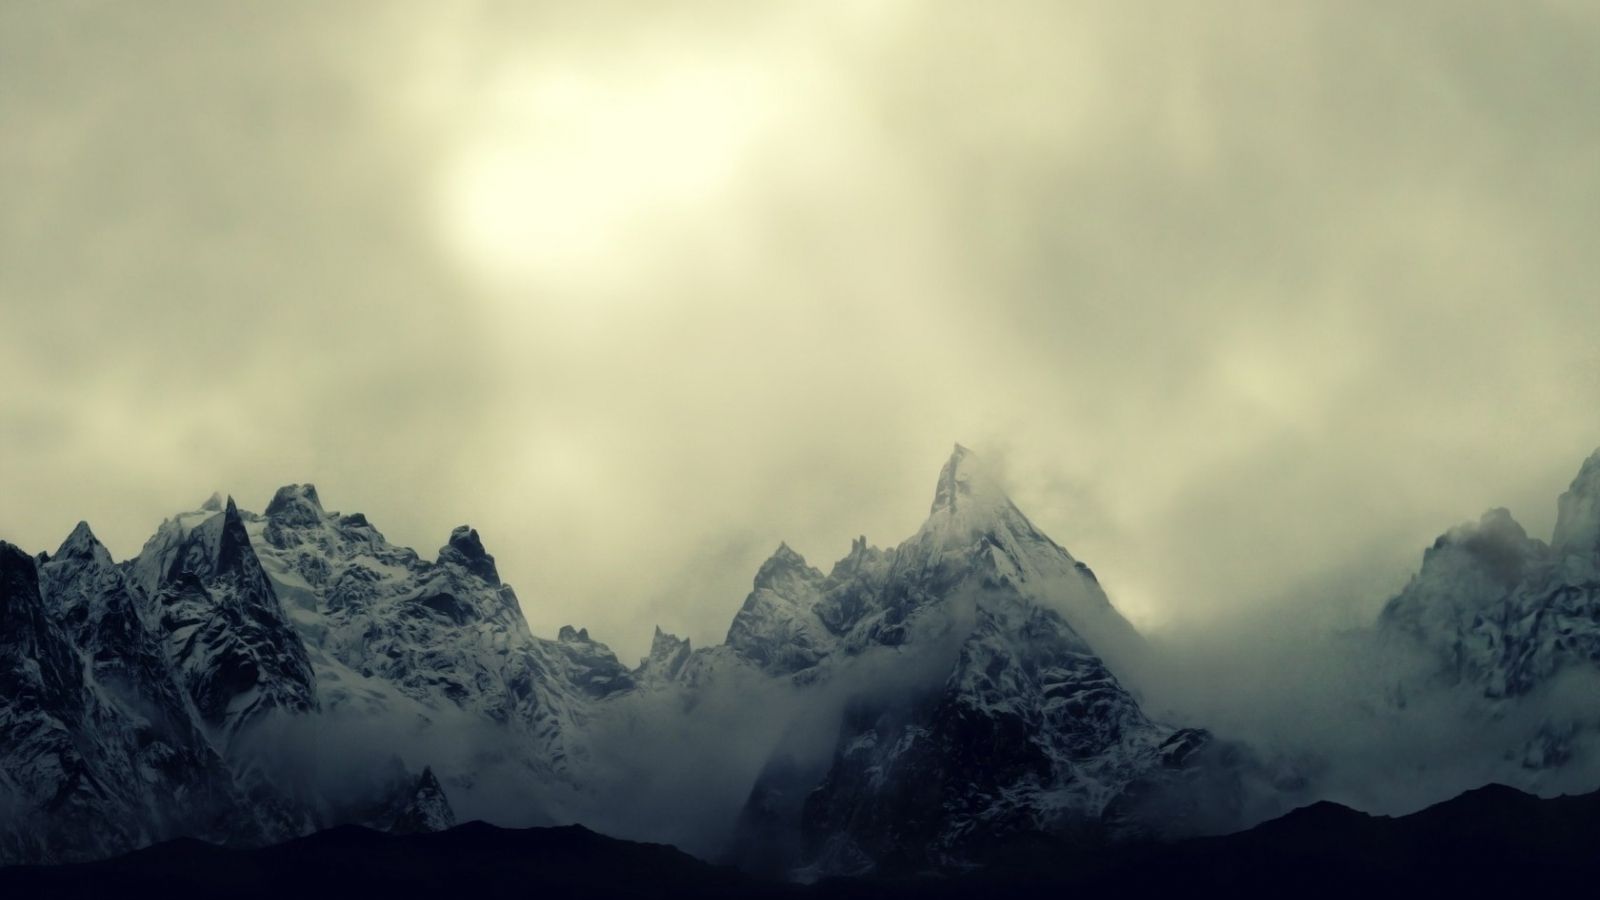 Free download Cloudy Mountains Landscape wallpaper Cloudy